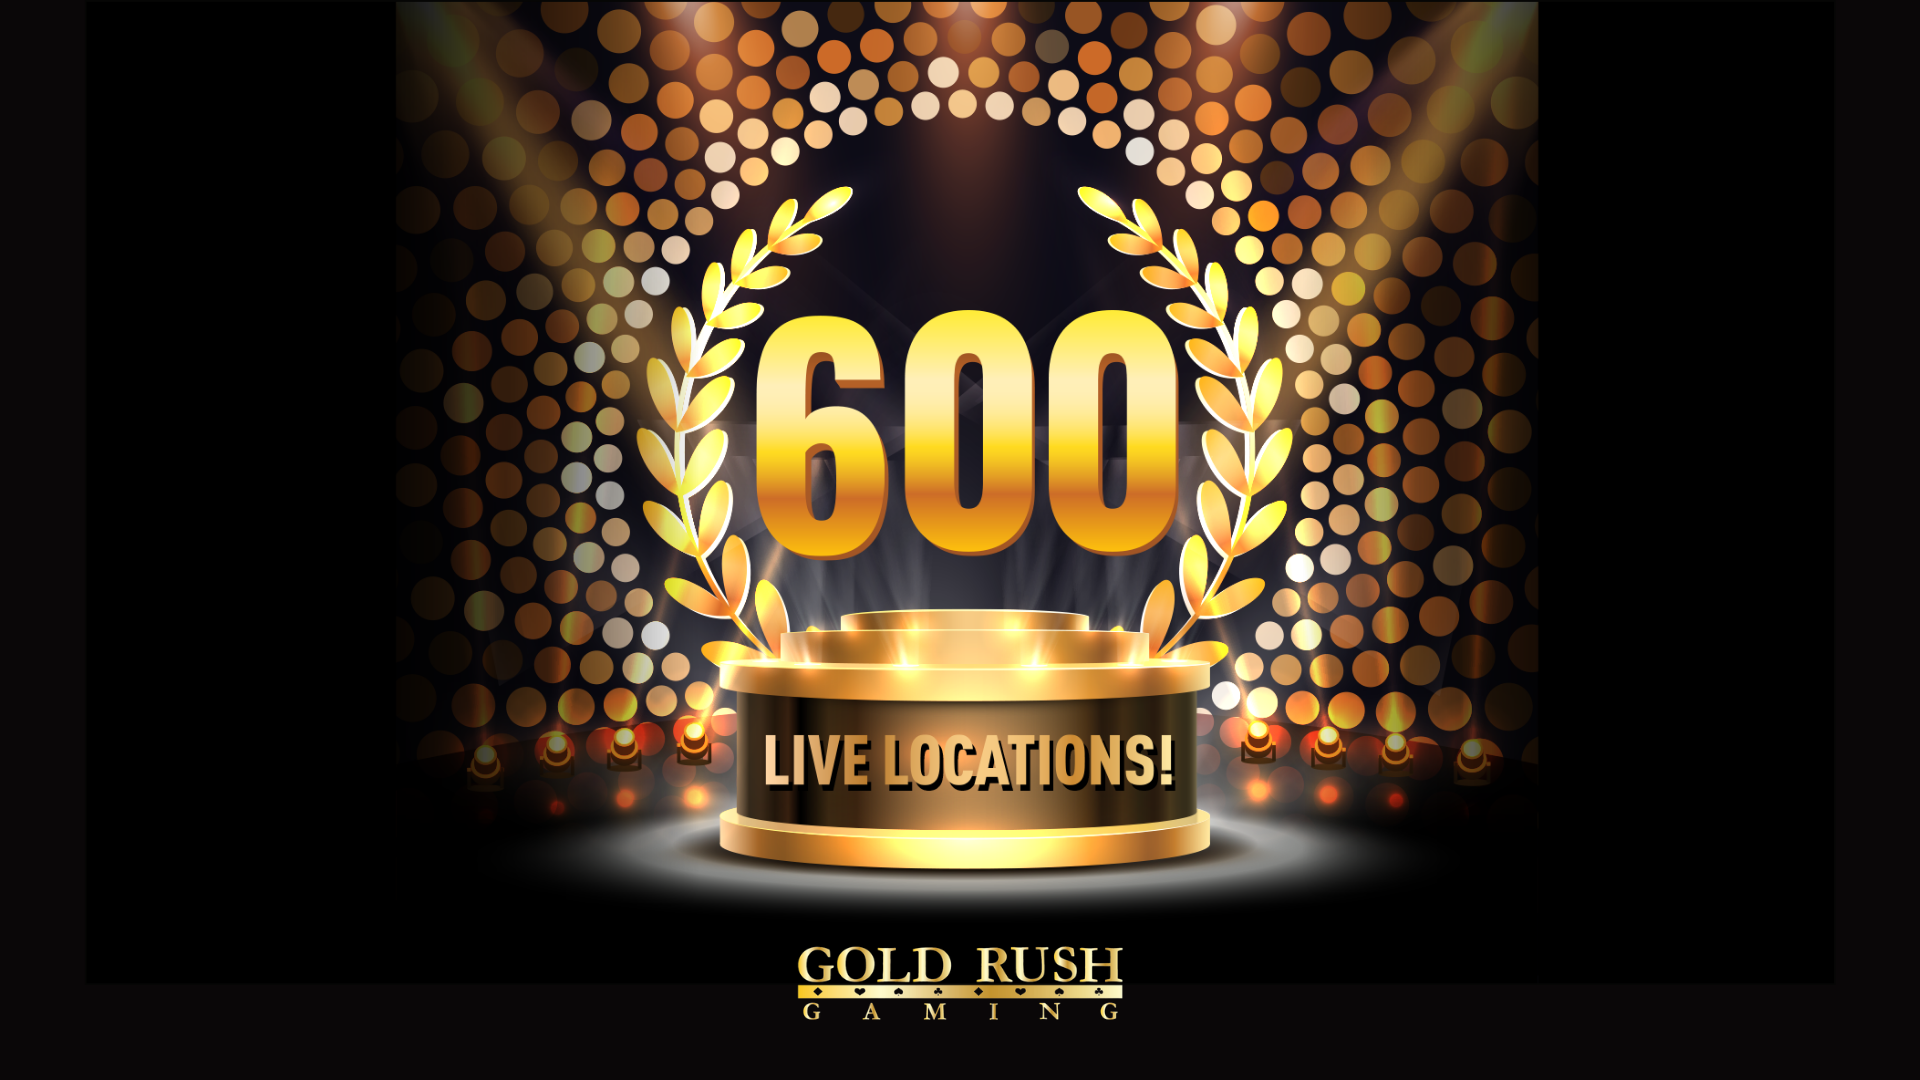 Gold Rush Gaming - 600 Live Locations